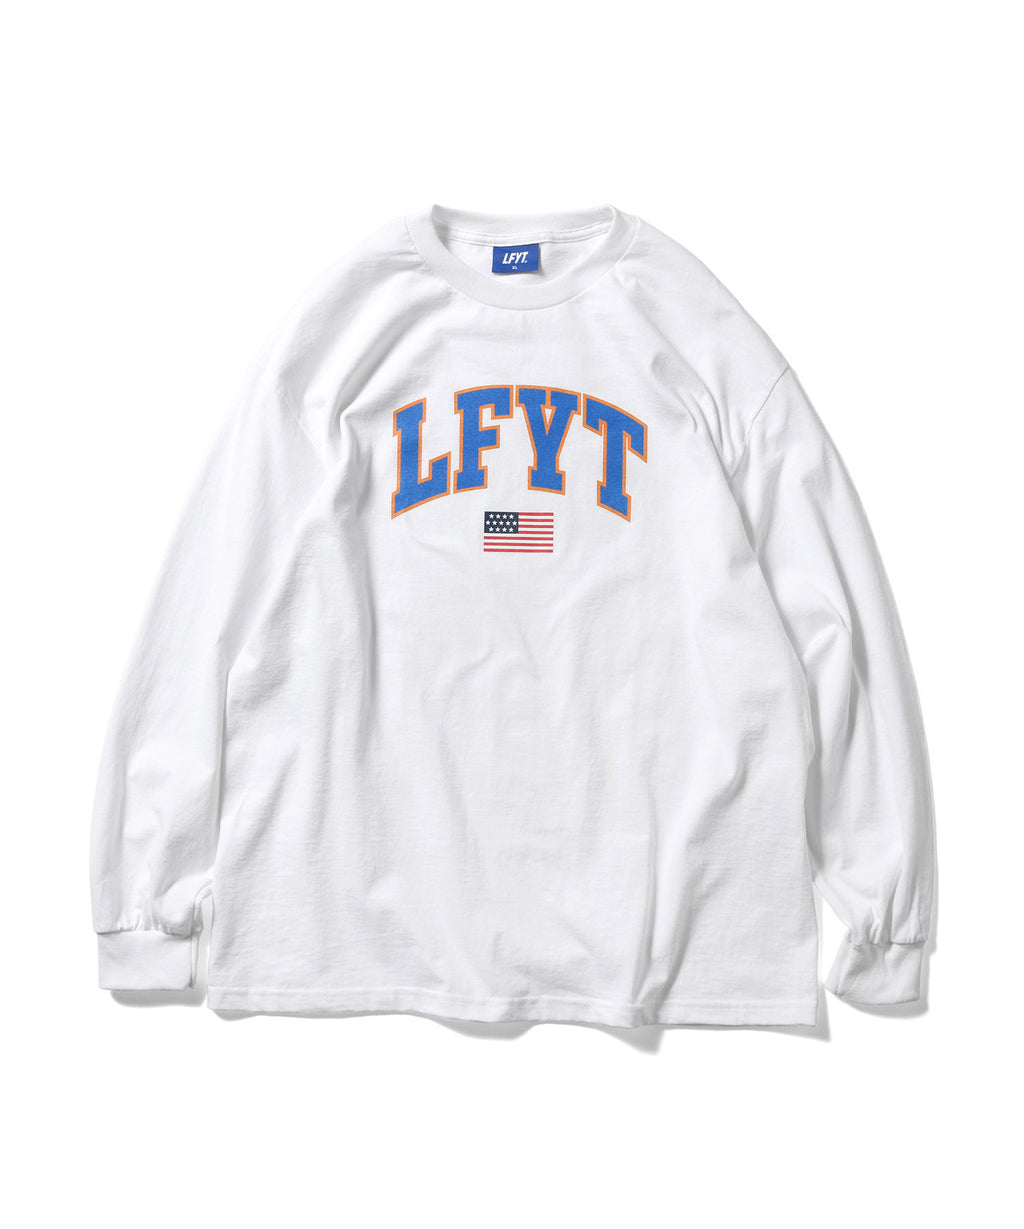 LFYT OLD GLORY ARCH LOGO L/S TEE LS220103 WHITE